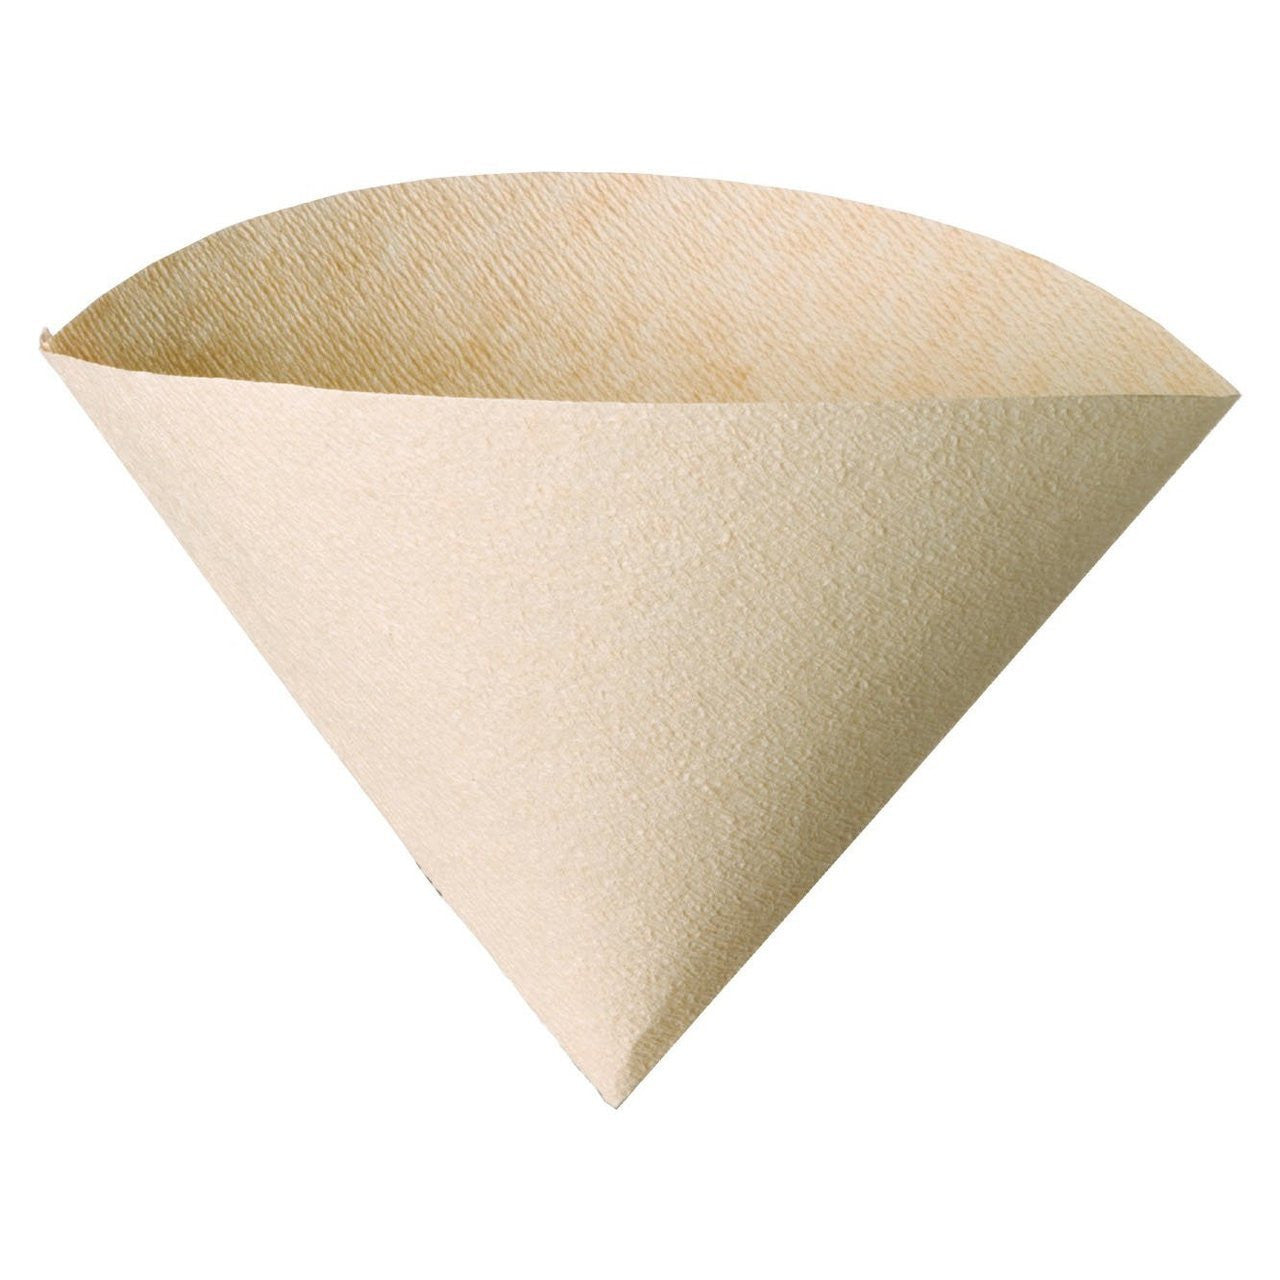 Hario V60 Coffee Paper Filters for 02 Dripper